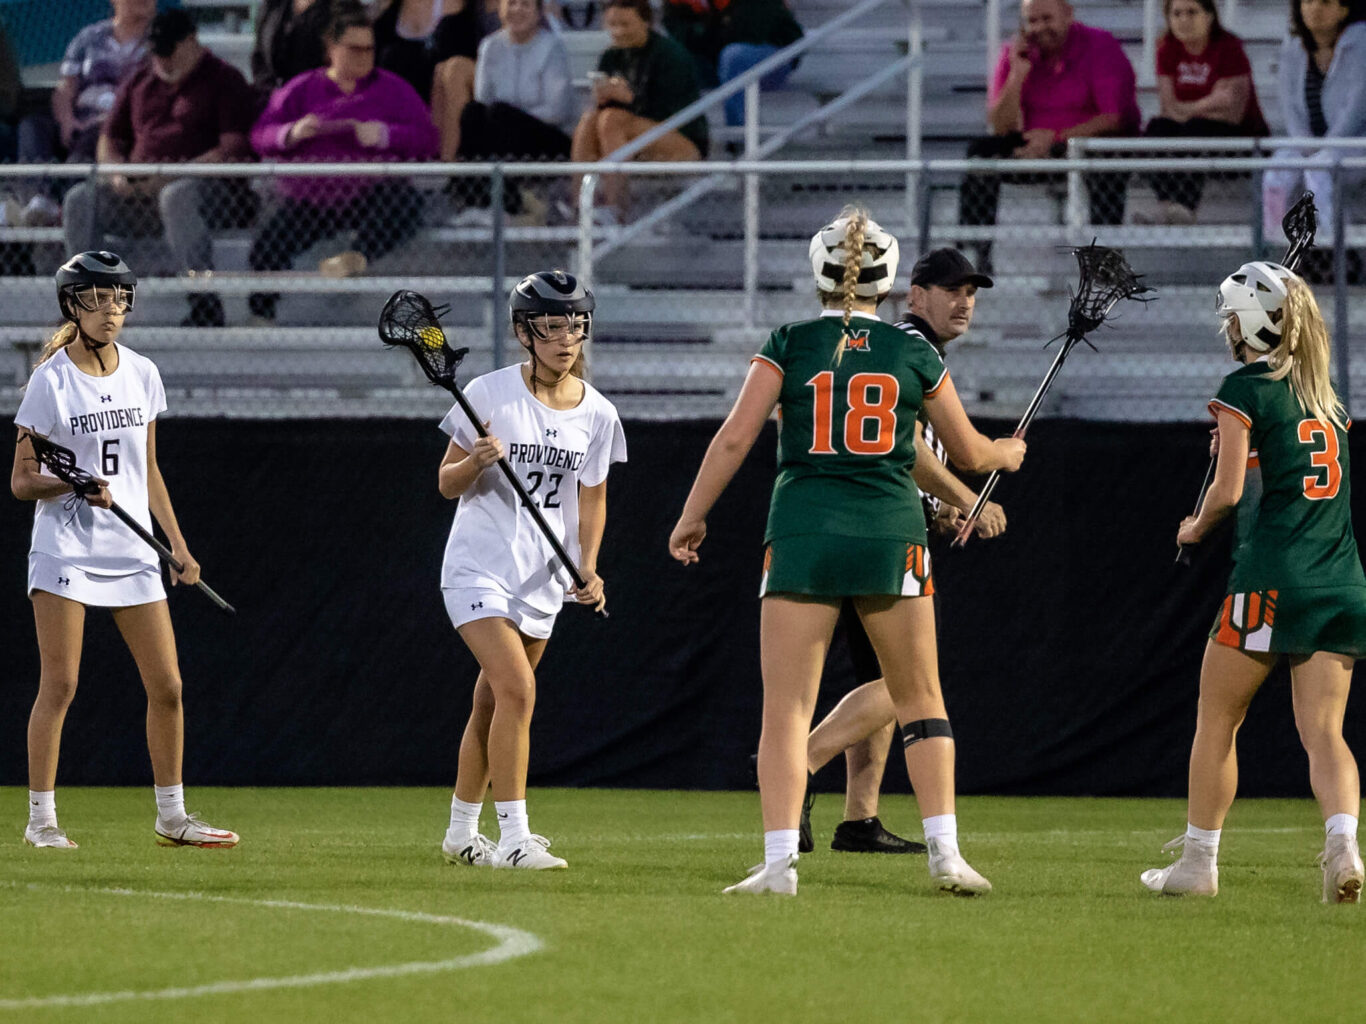 A team of girls playing lacrosse on a field.